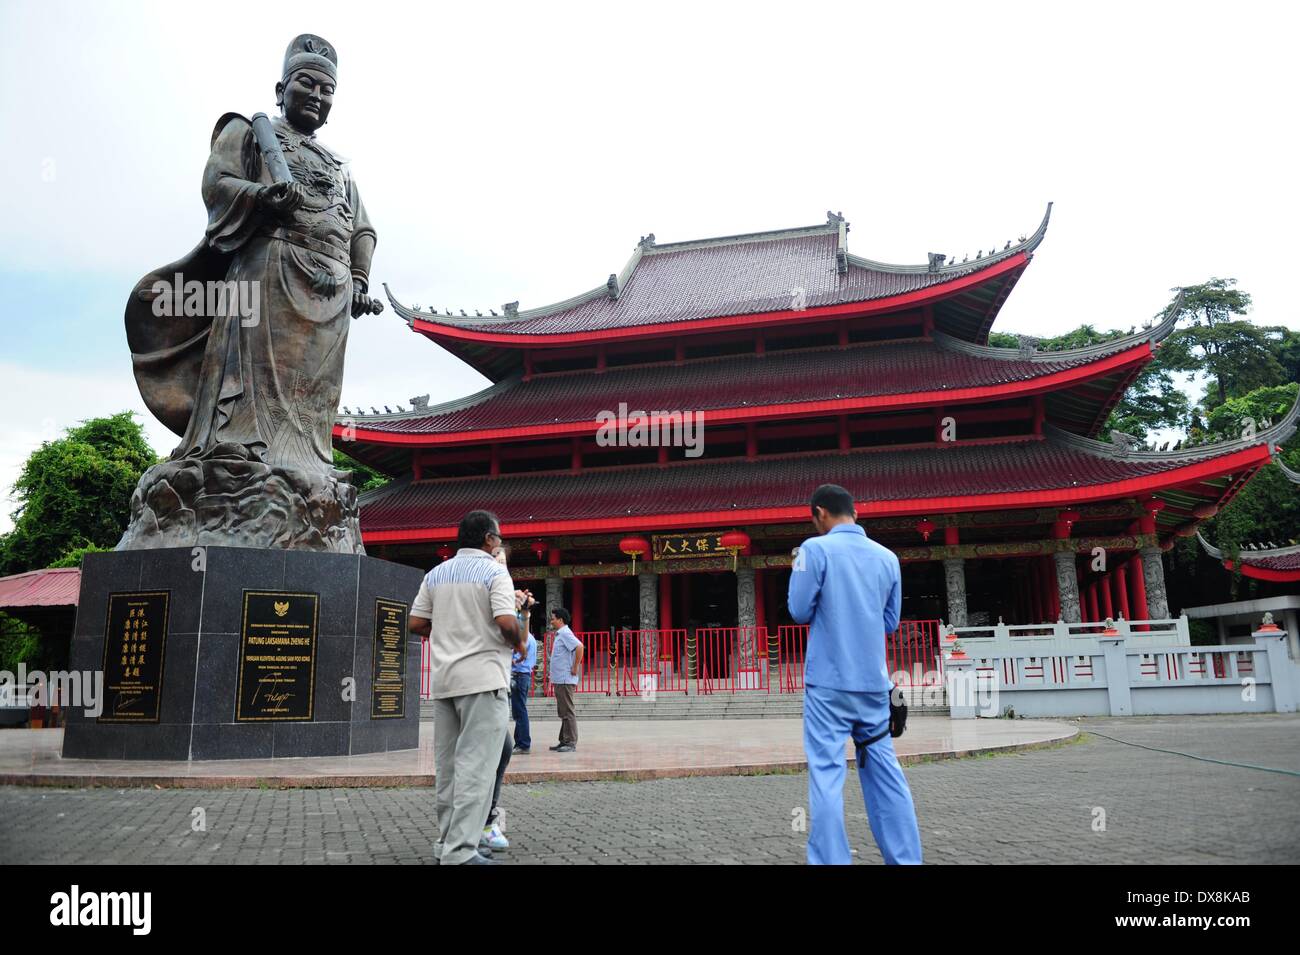 Semarang, Indonesia. 20th Mar, 2014. Tourist stand beside the statue of Chinese navy explorer Zheng He in front of the Sam Poo Kong Temple, in Semarang, Central Java, Indonesia, March 20, 2014. Chinese navy explorer Zheng He who visited the Central Java Province's port city of Semarang 600 years ago, built a mosque and set up a Chinese Muslim community in the city. The mosque was later turned into a temple by Semarang residents, now known as Sam Poo Kong with a huge Zheng He statue in its front. © Zulkarnain/Xinhua/Alamy Live News Stock Photo